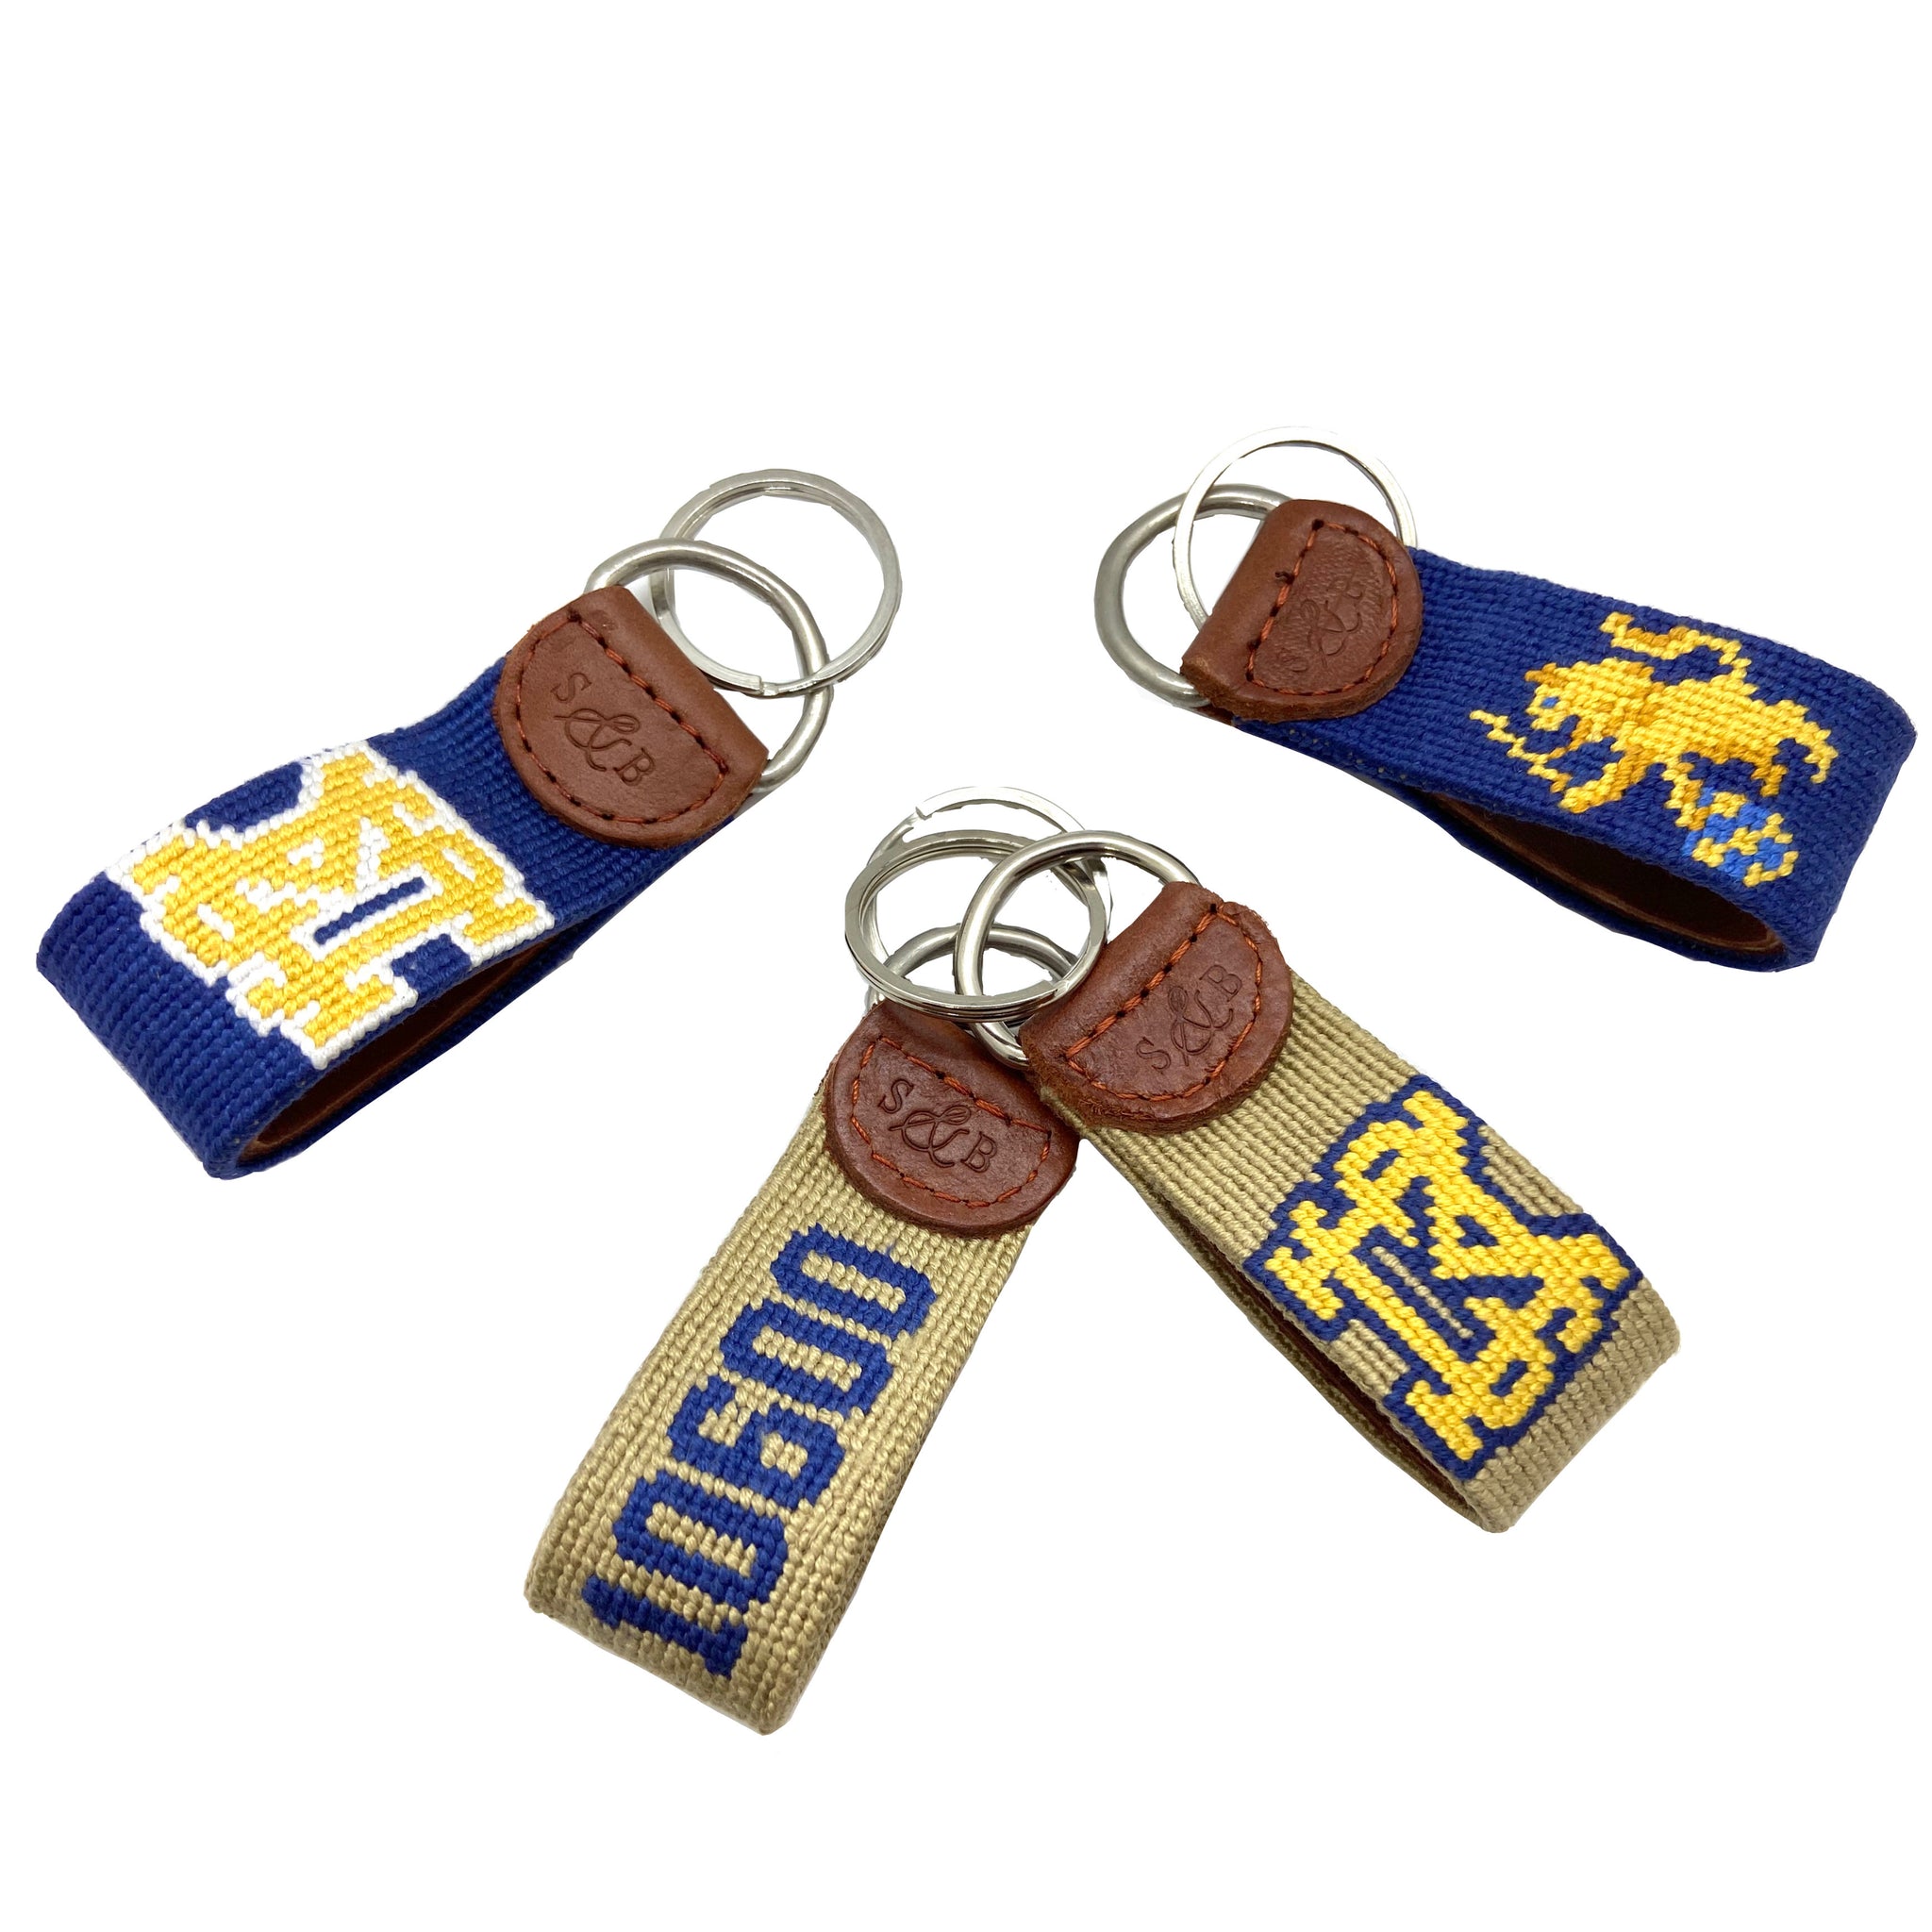 Smathers and Branson Key Fob